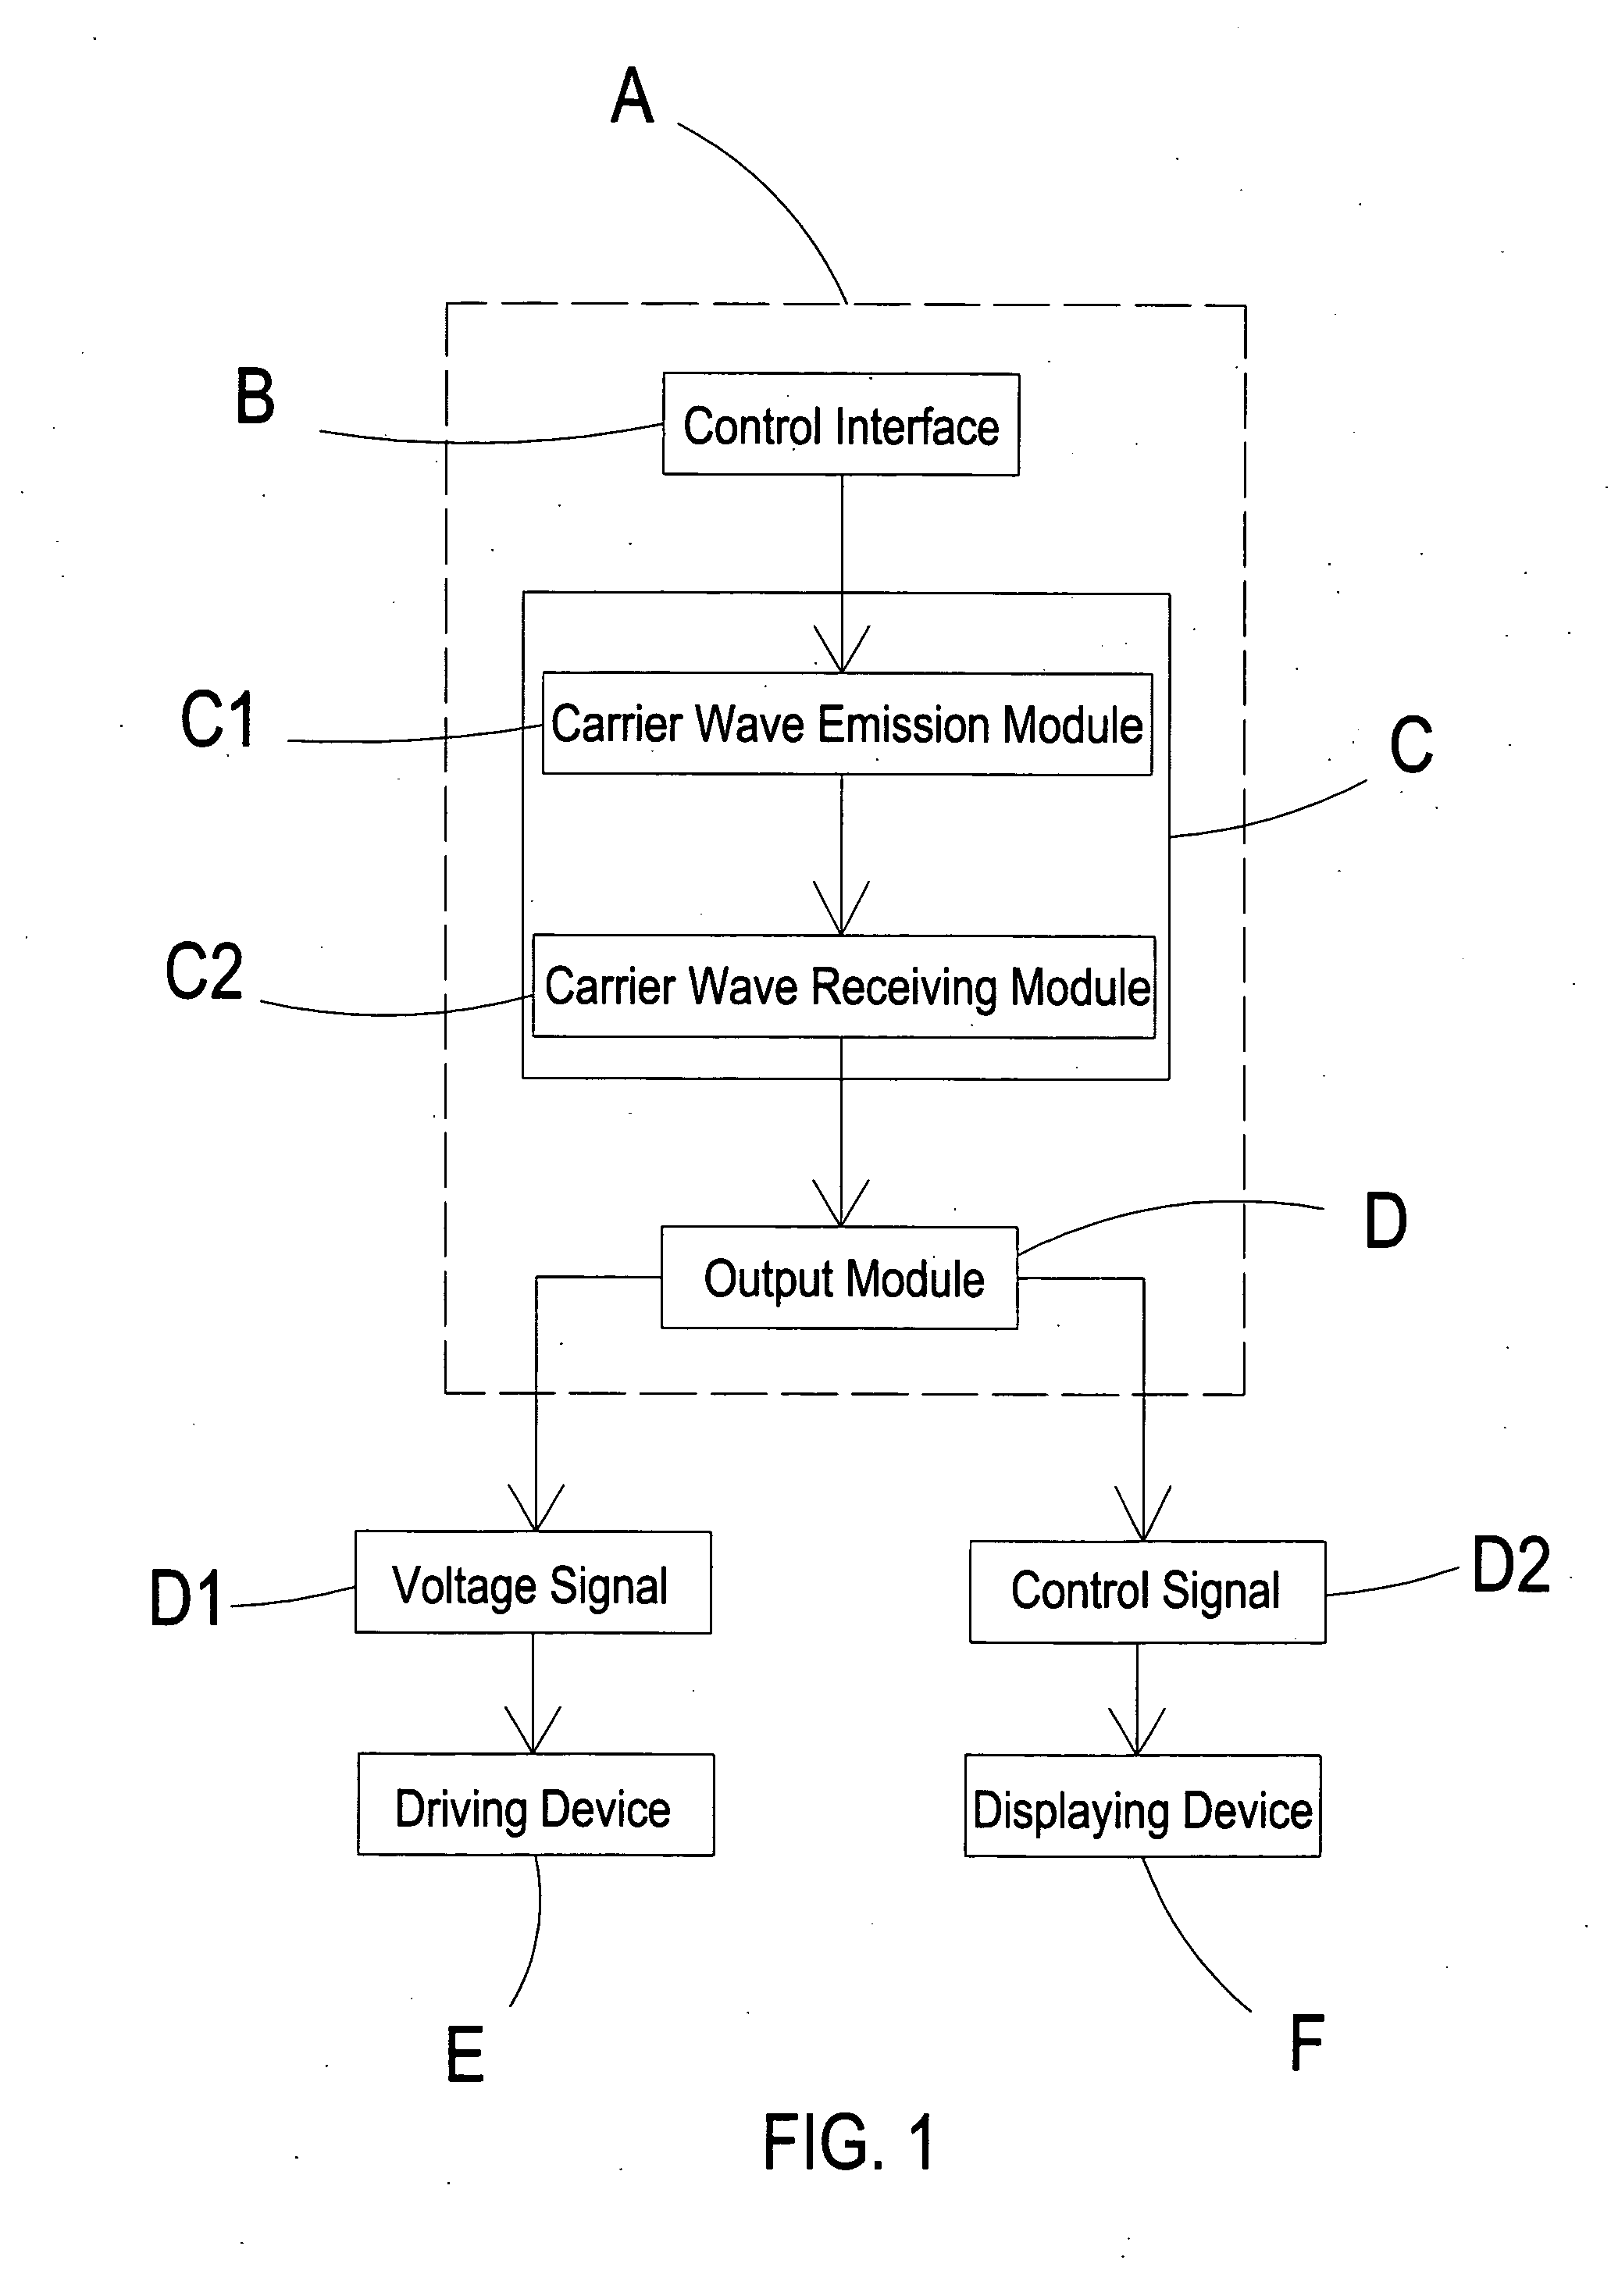 Assembly device which controls transmission of data signals with or without using wires